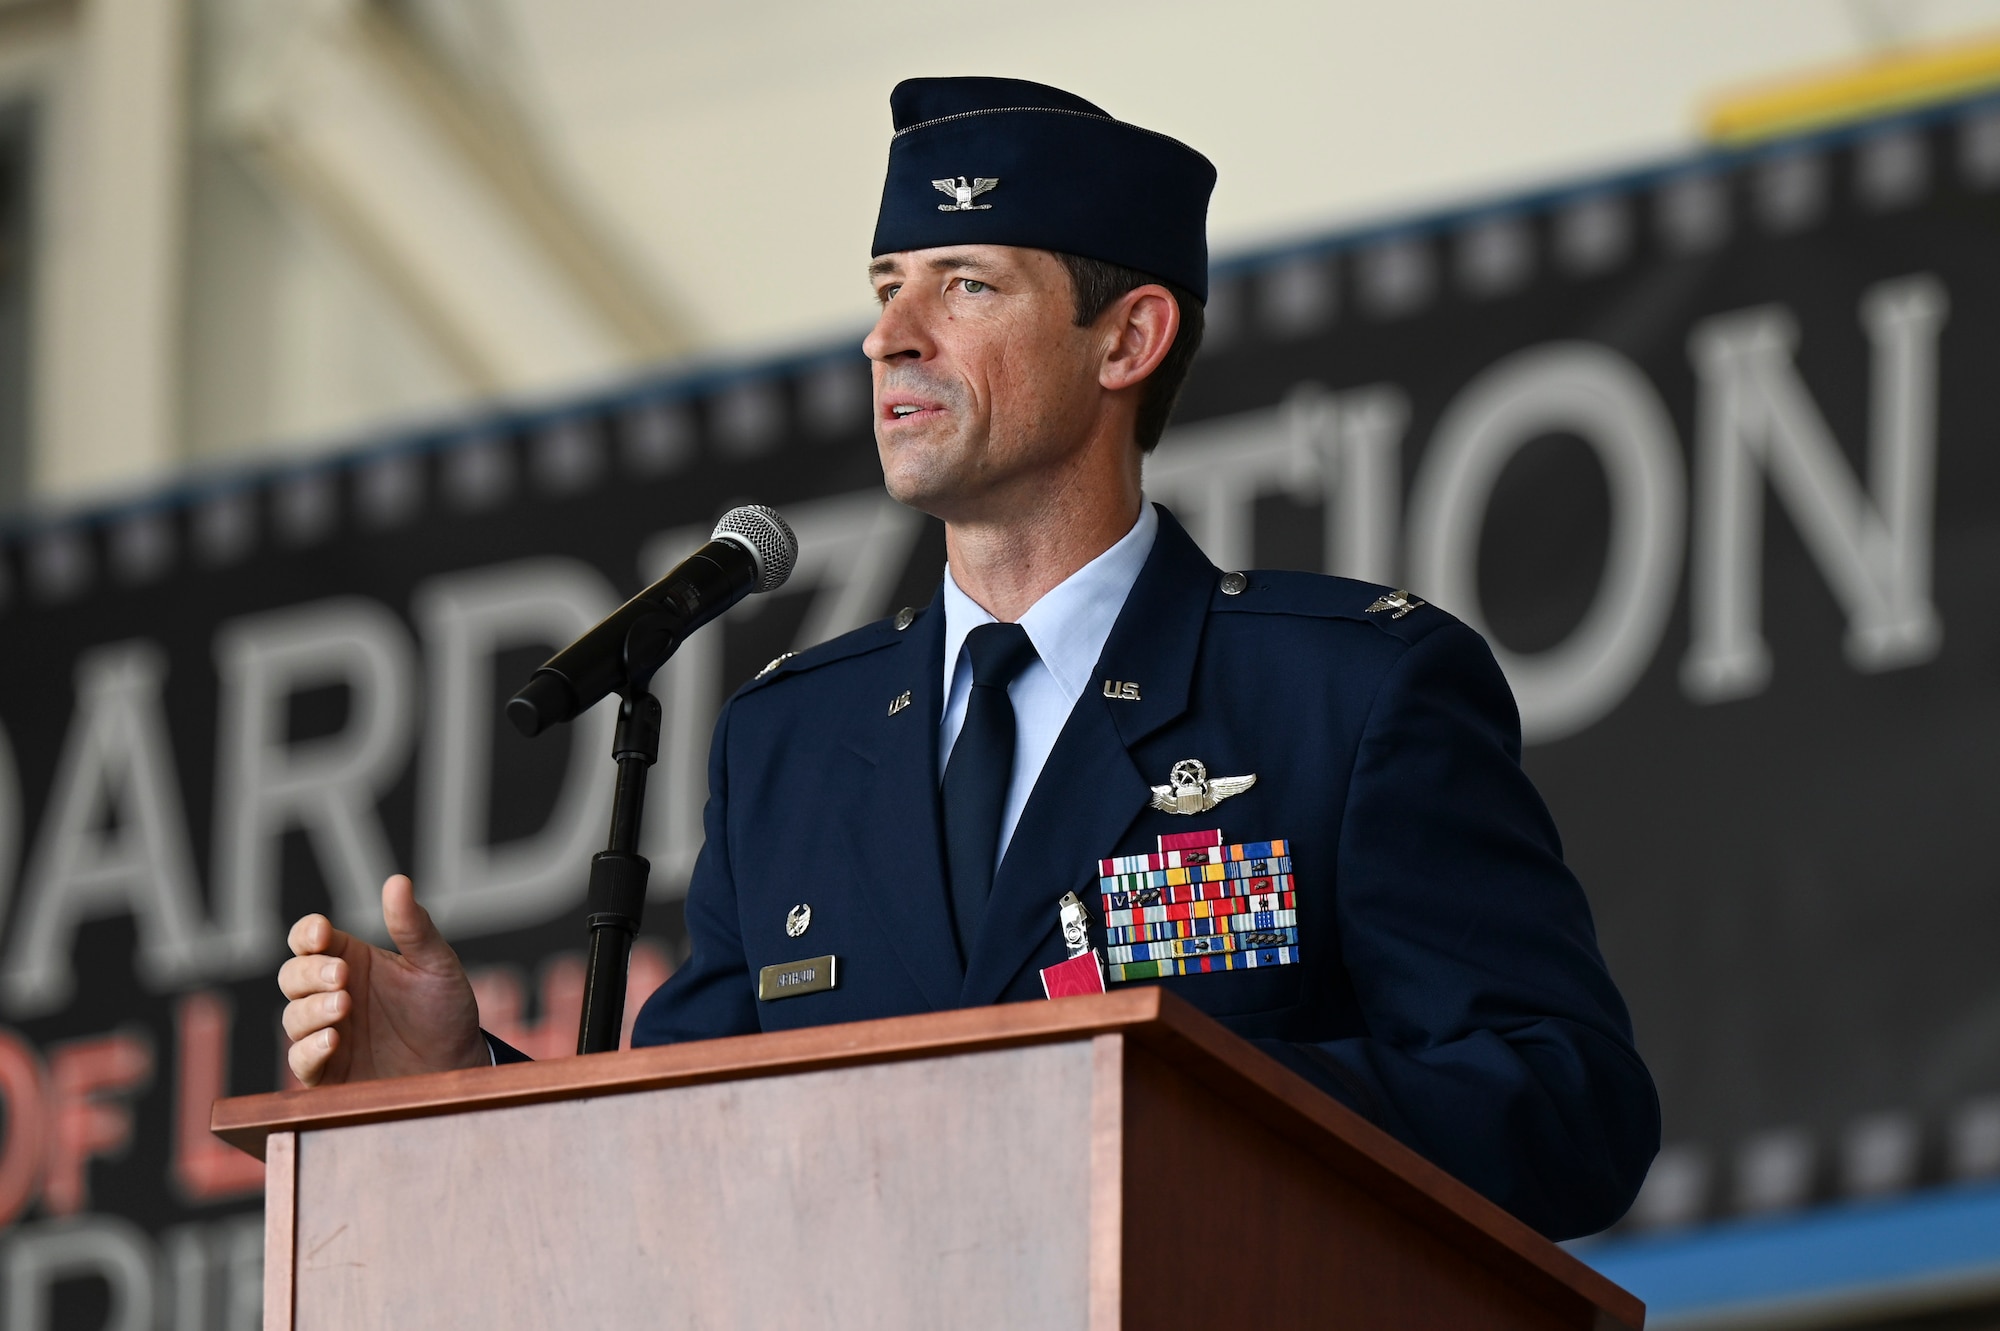 33rd Fighter Wing Change of Command